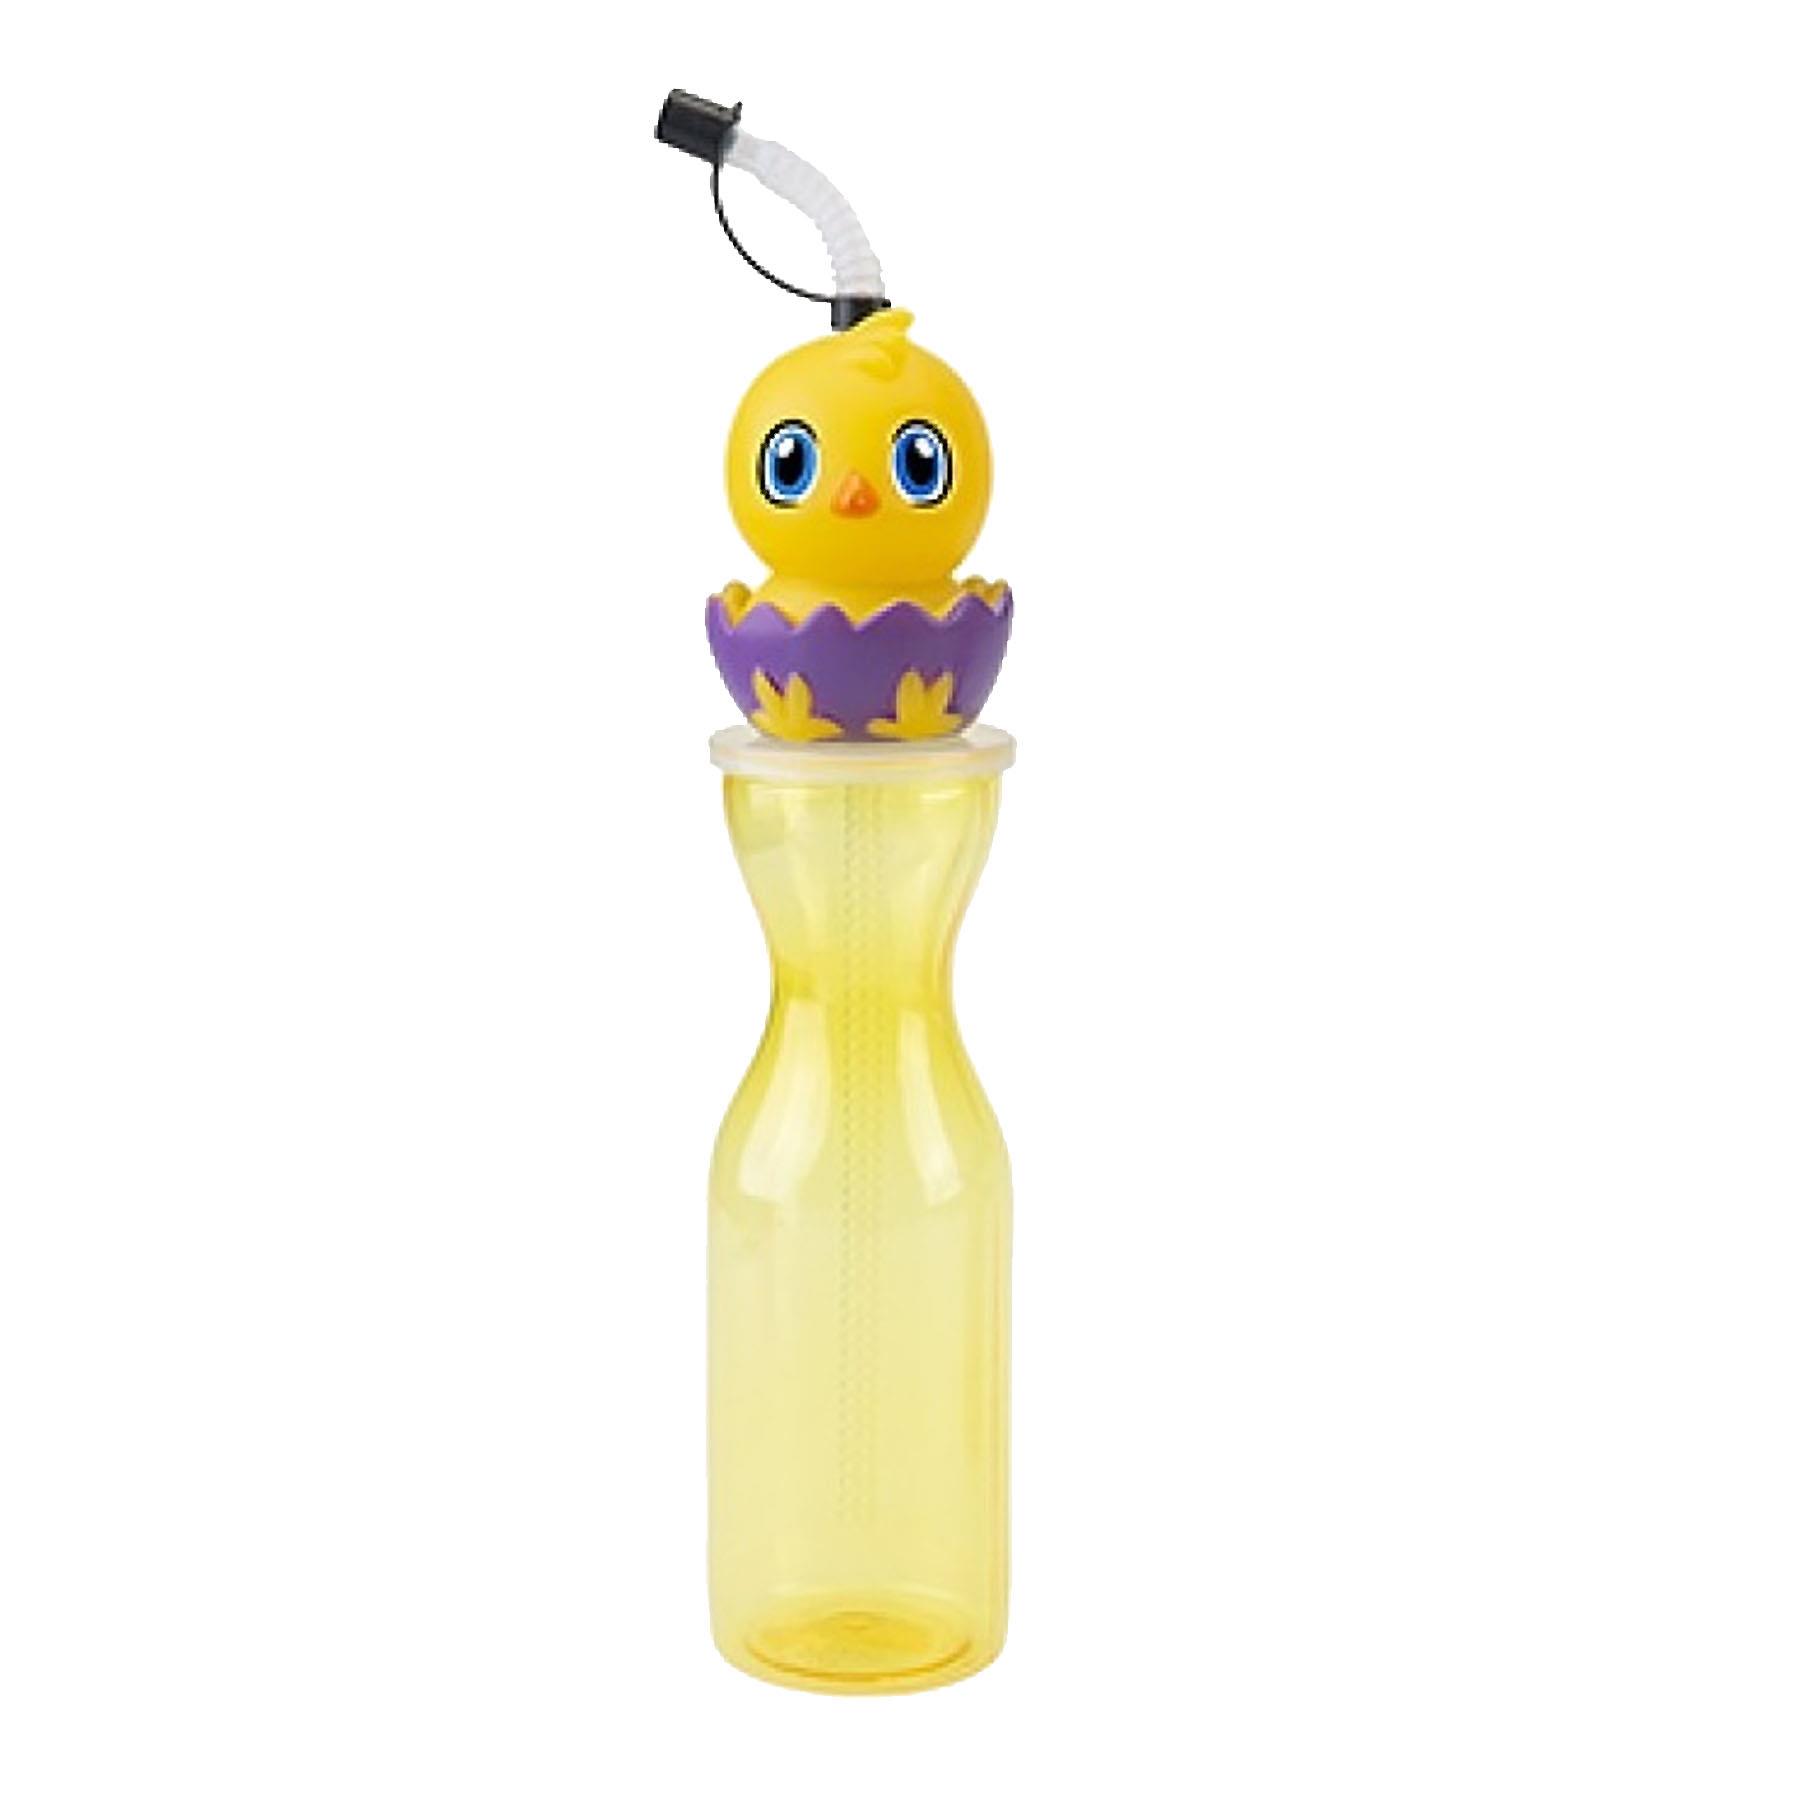 Children's 500ml Plastic Bottle with Flexi Straw and Easter Chick Top